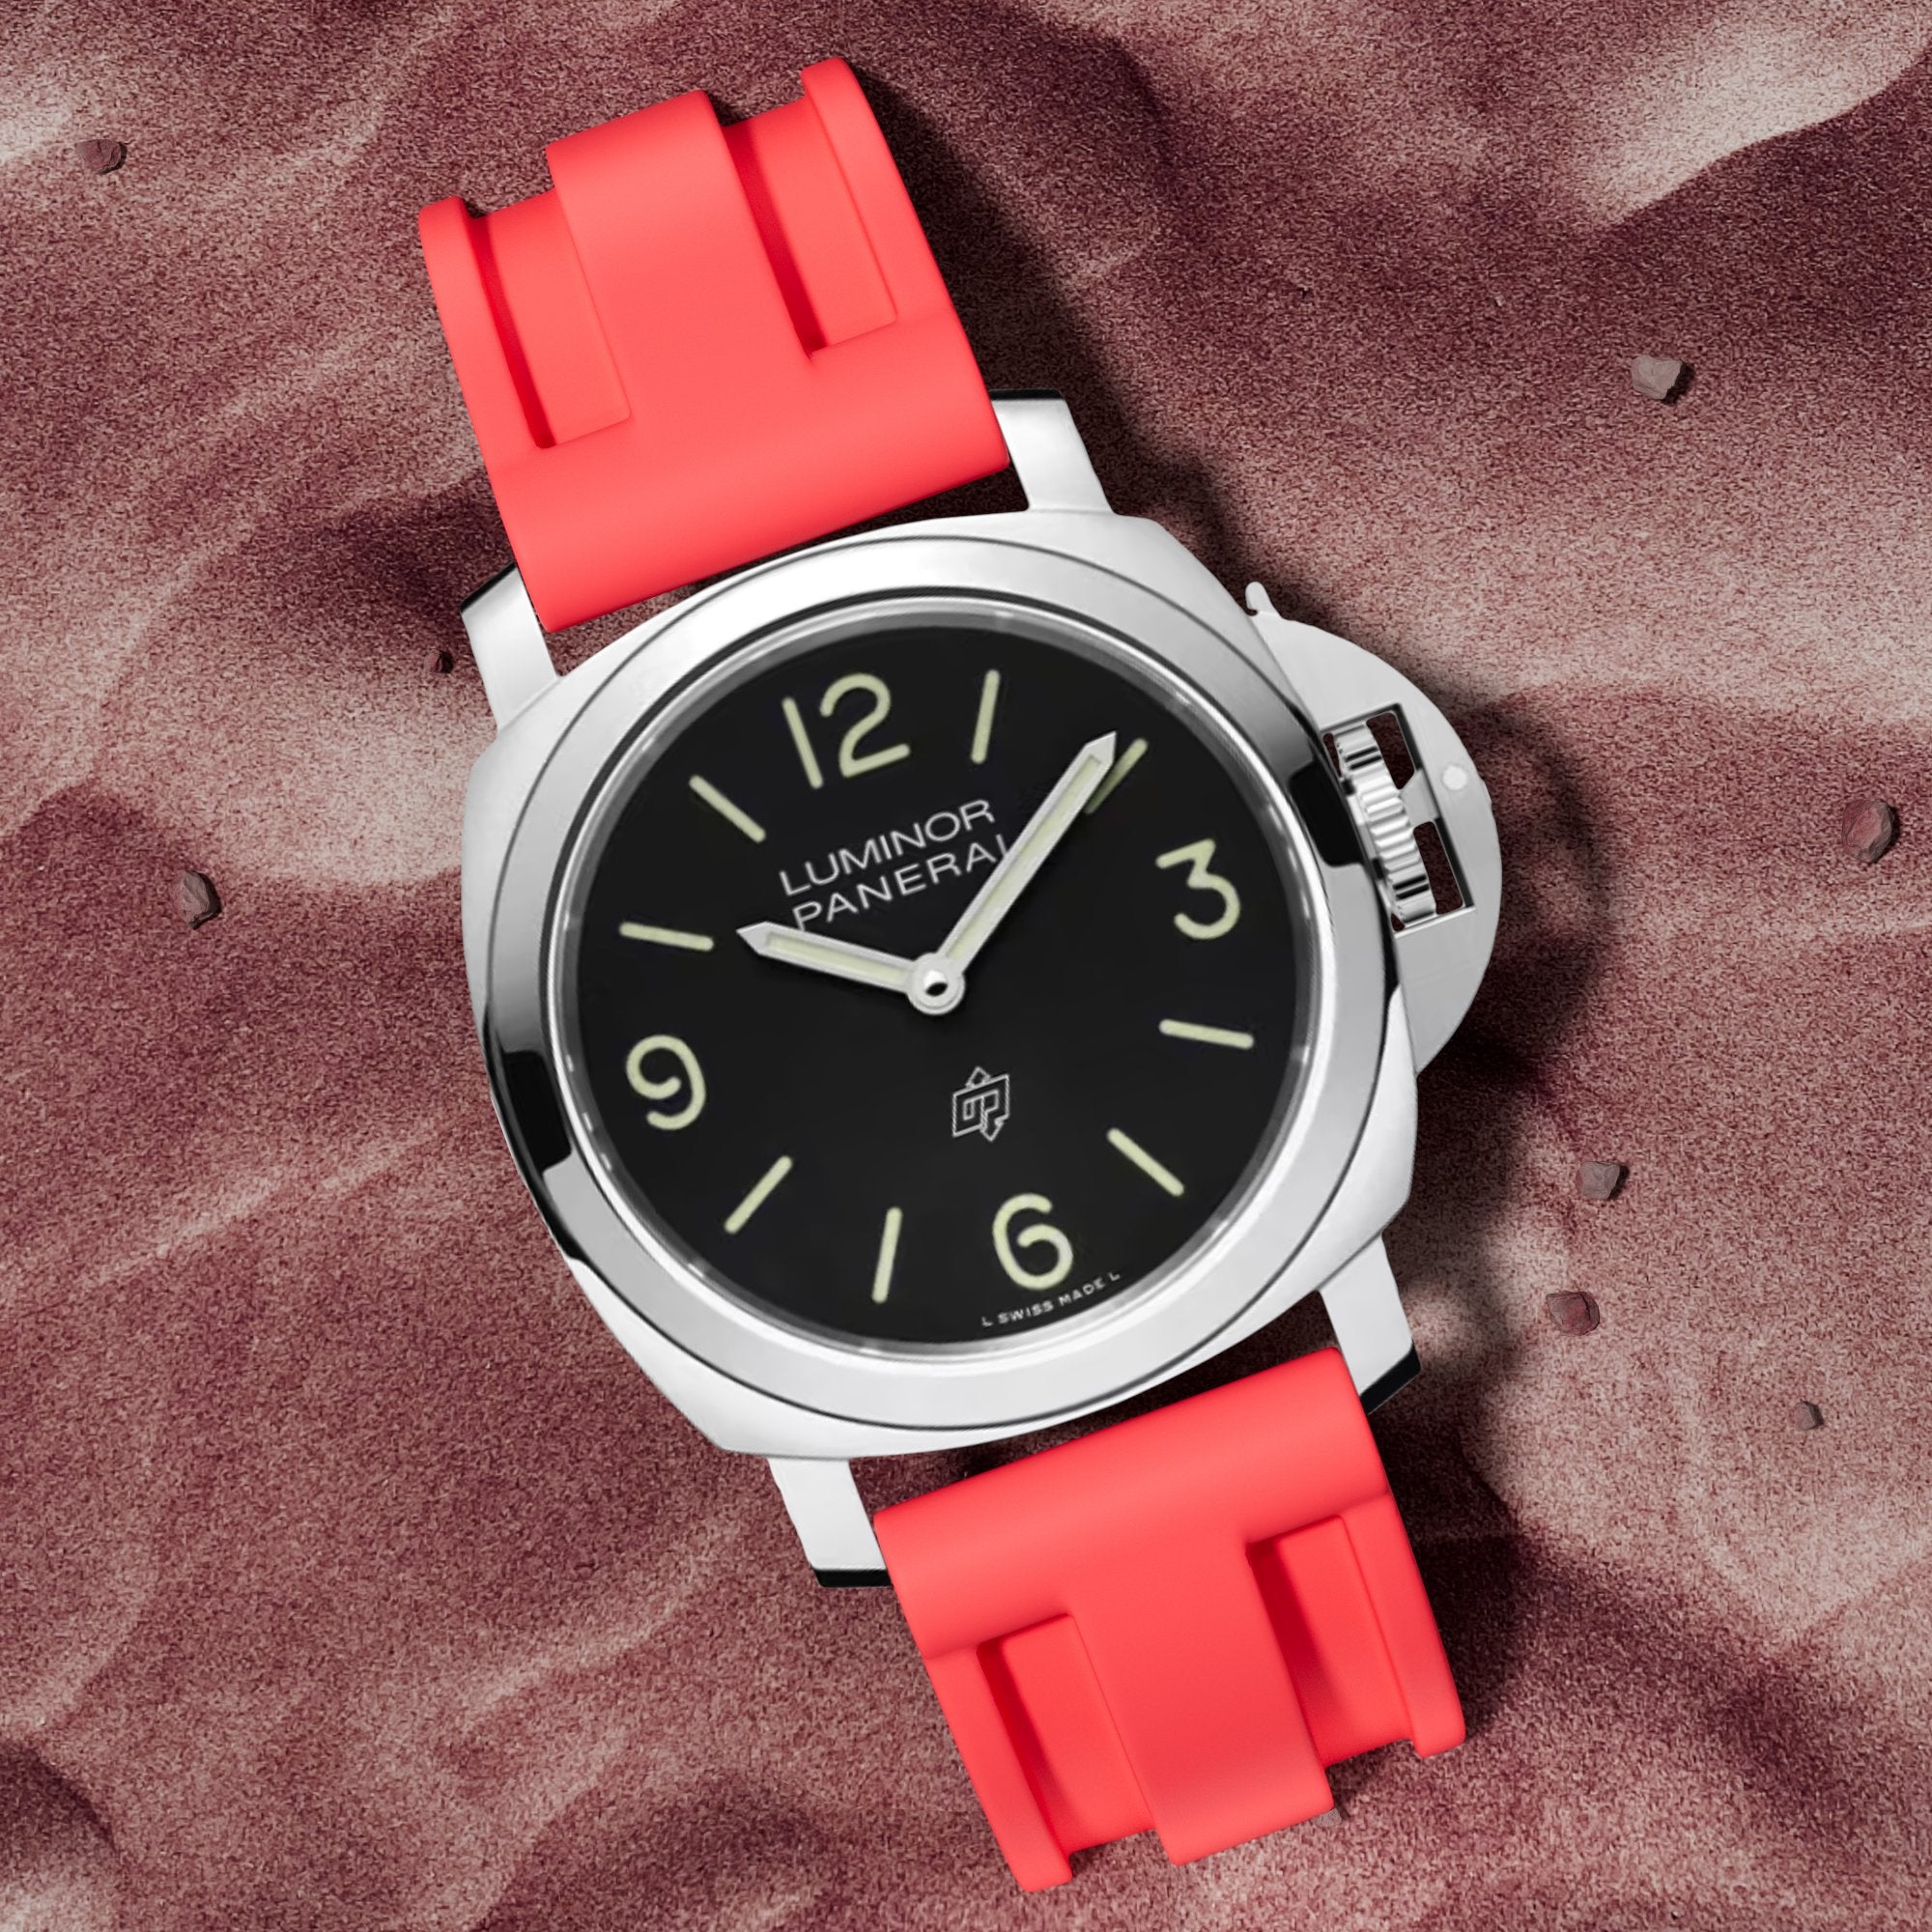 Pinnacle Premium Silicone Strap - Compatible with Panerai - Coral Red (2420 | LSR) -Strapseeker